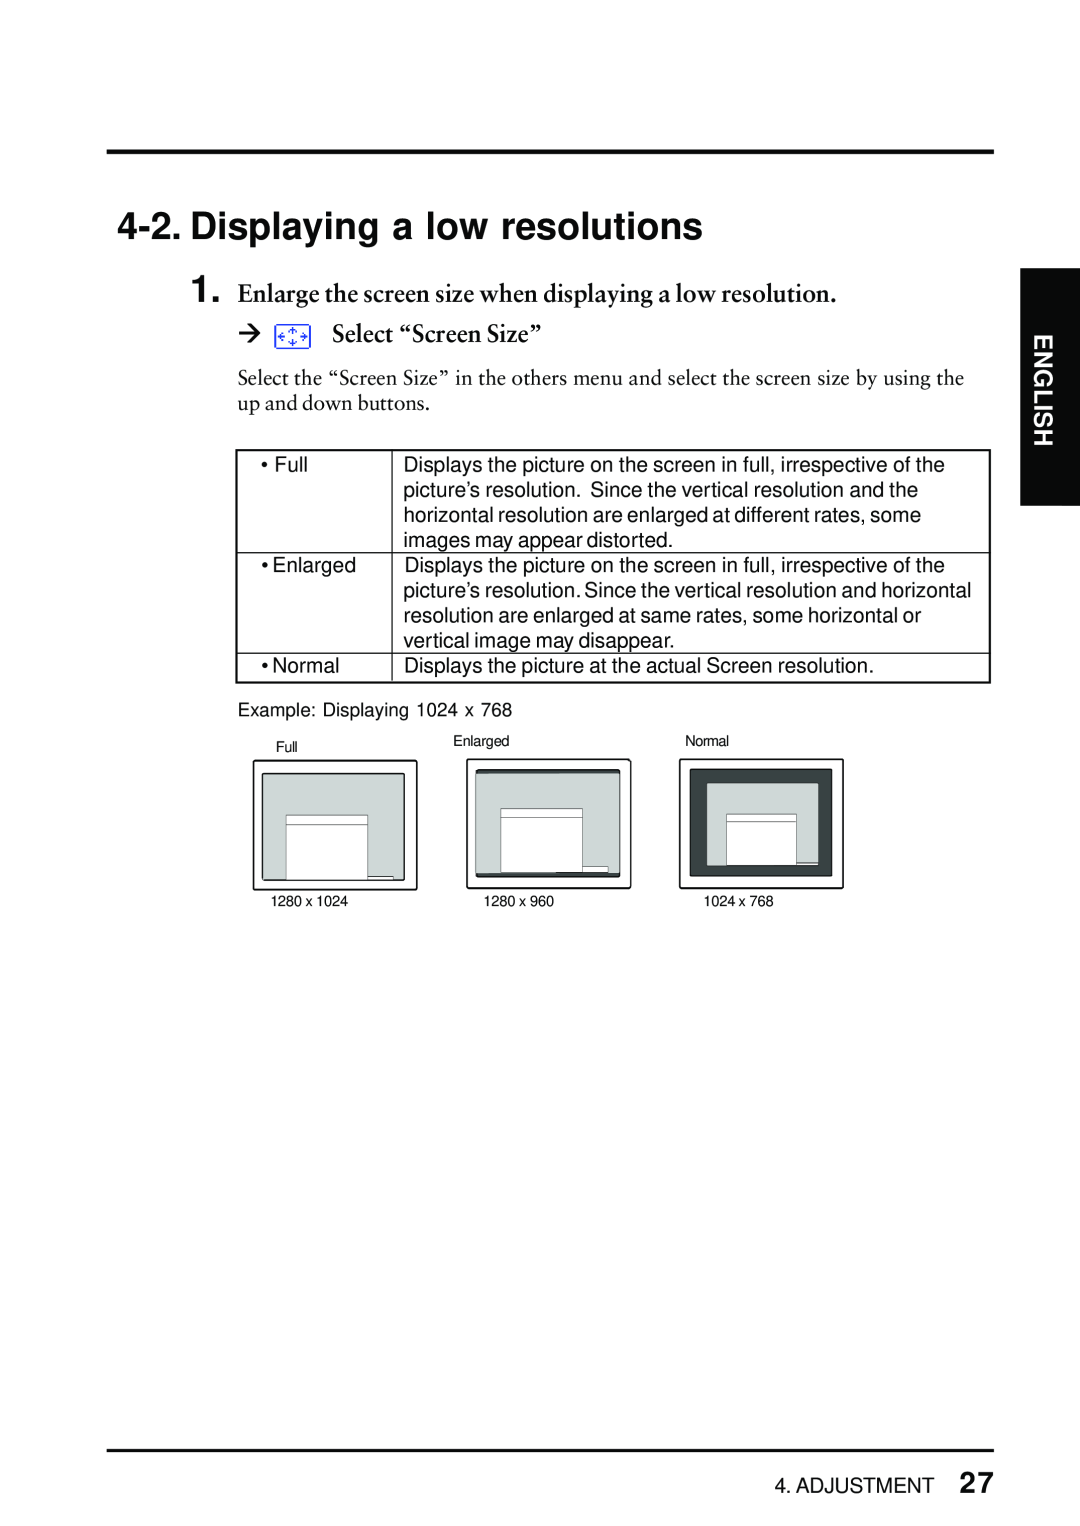 Eizo FlexScan L675 manual Displaying a low resolutions, Enlarge the screen size when displaying a low resolution, English 